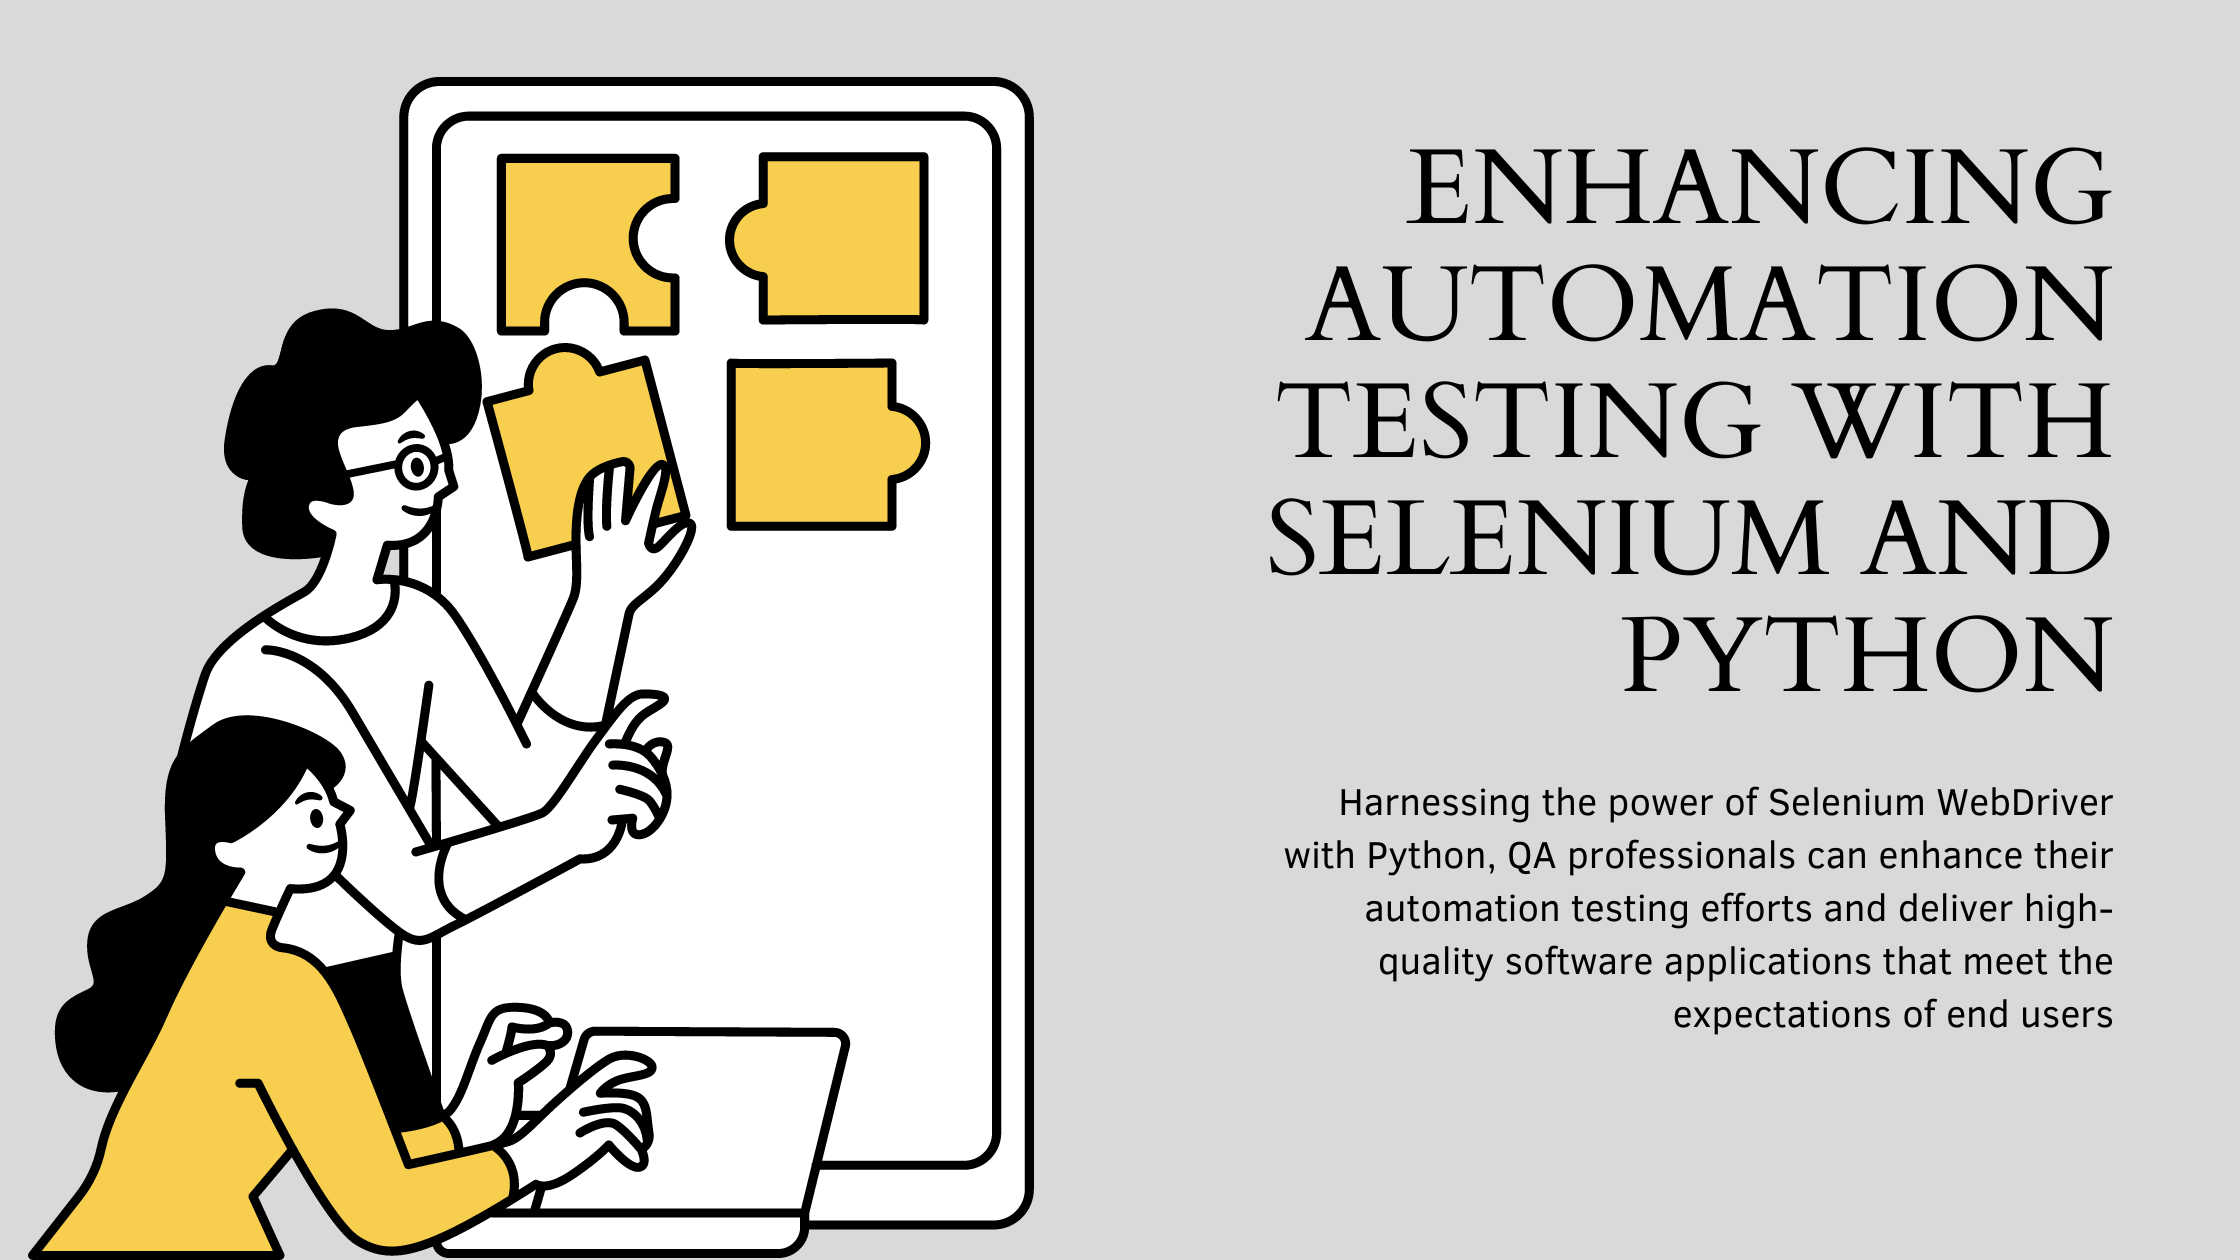 Quality-Assurance-Enhancing-Automation-Testing-with-Selenium-and-Python